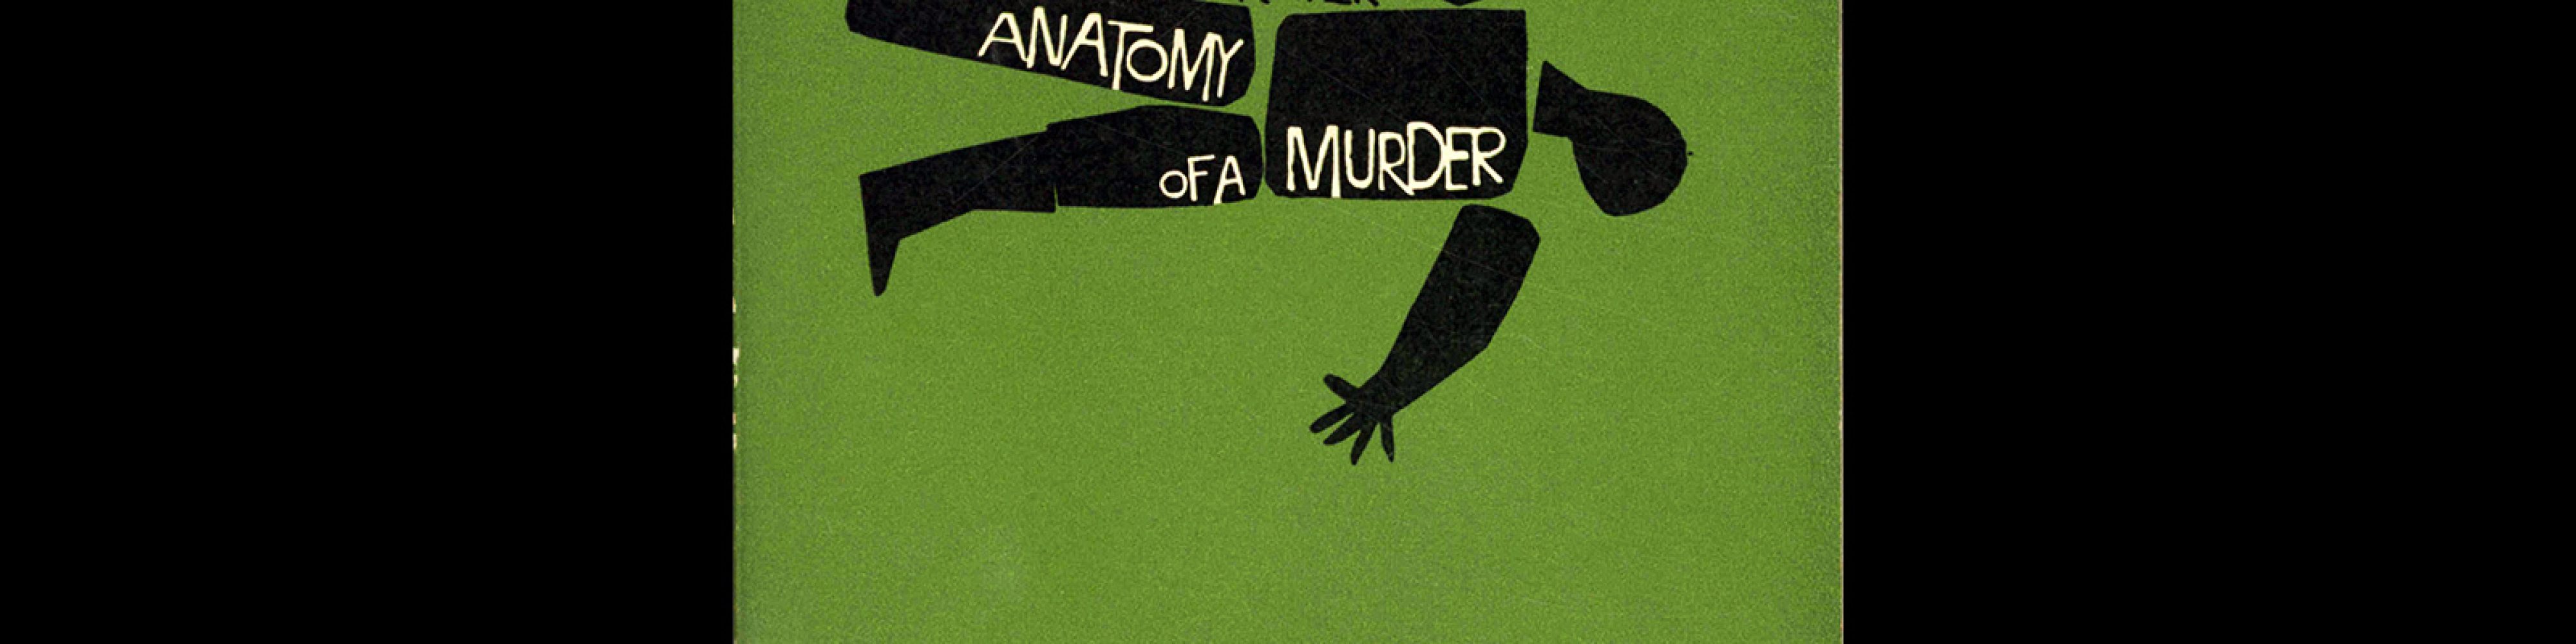 Anatomy of a Murder by Robert Traver, Penguin Books, 1960. Designed by Saul Bass